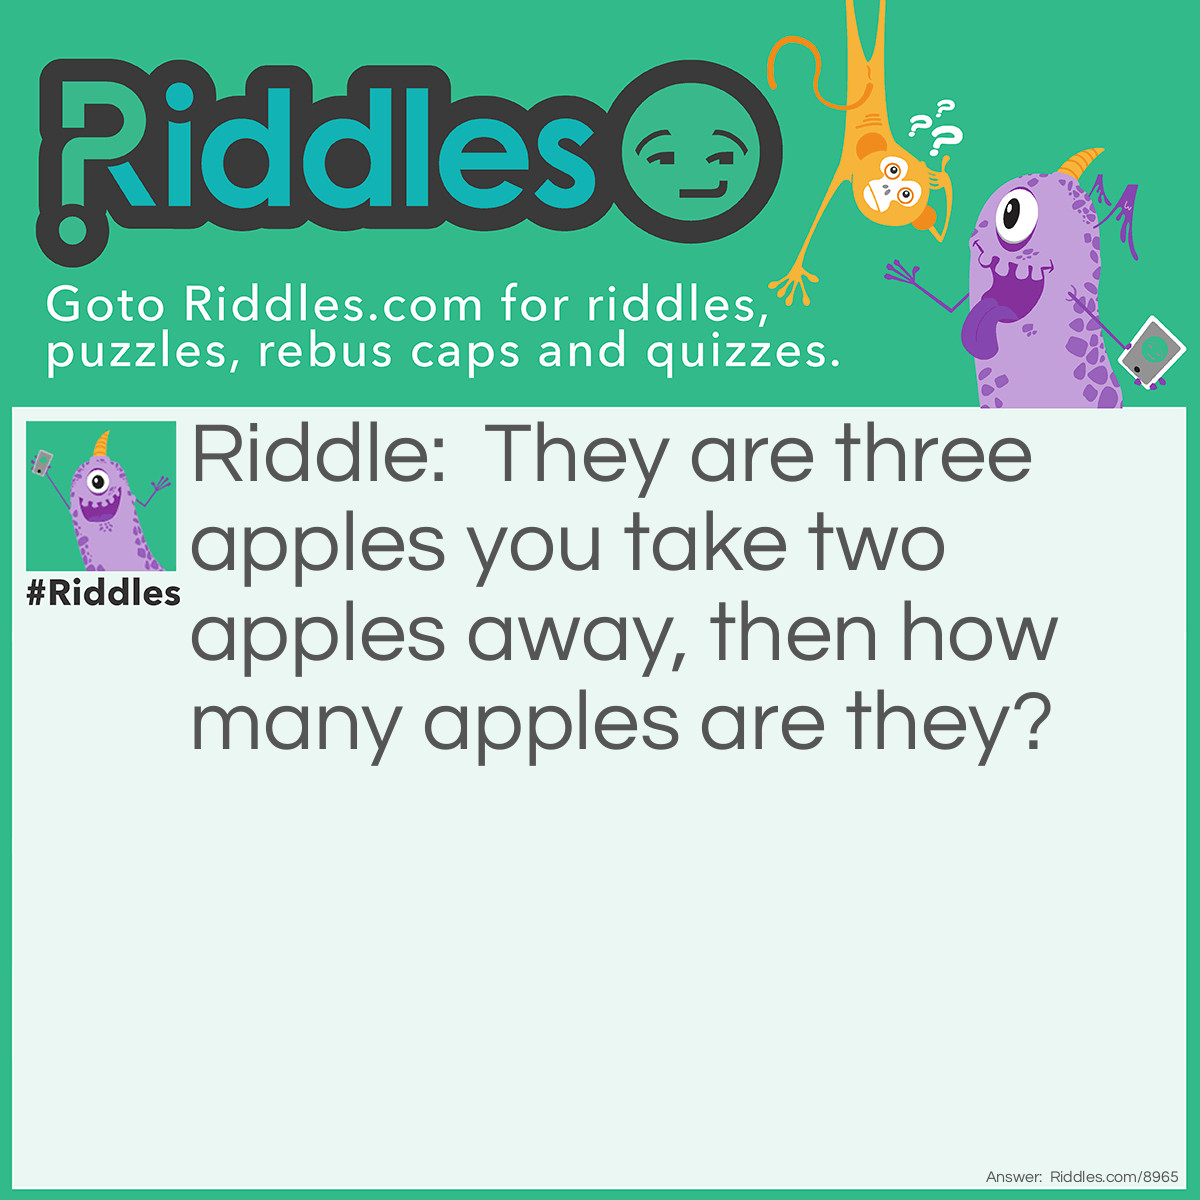 Riddle: They are three apples you take two apples away, then how many apples are they? Answer: One, because you took two away from let's say a table so they are one more left.